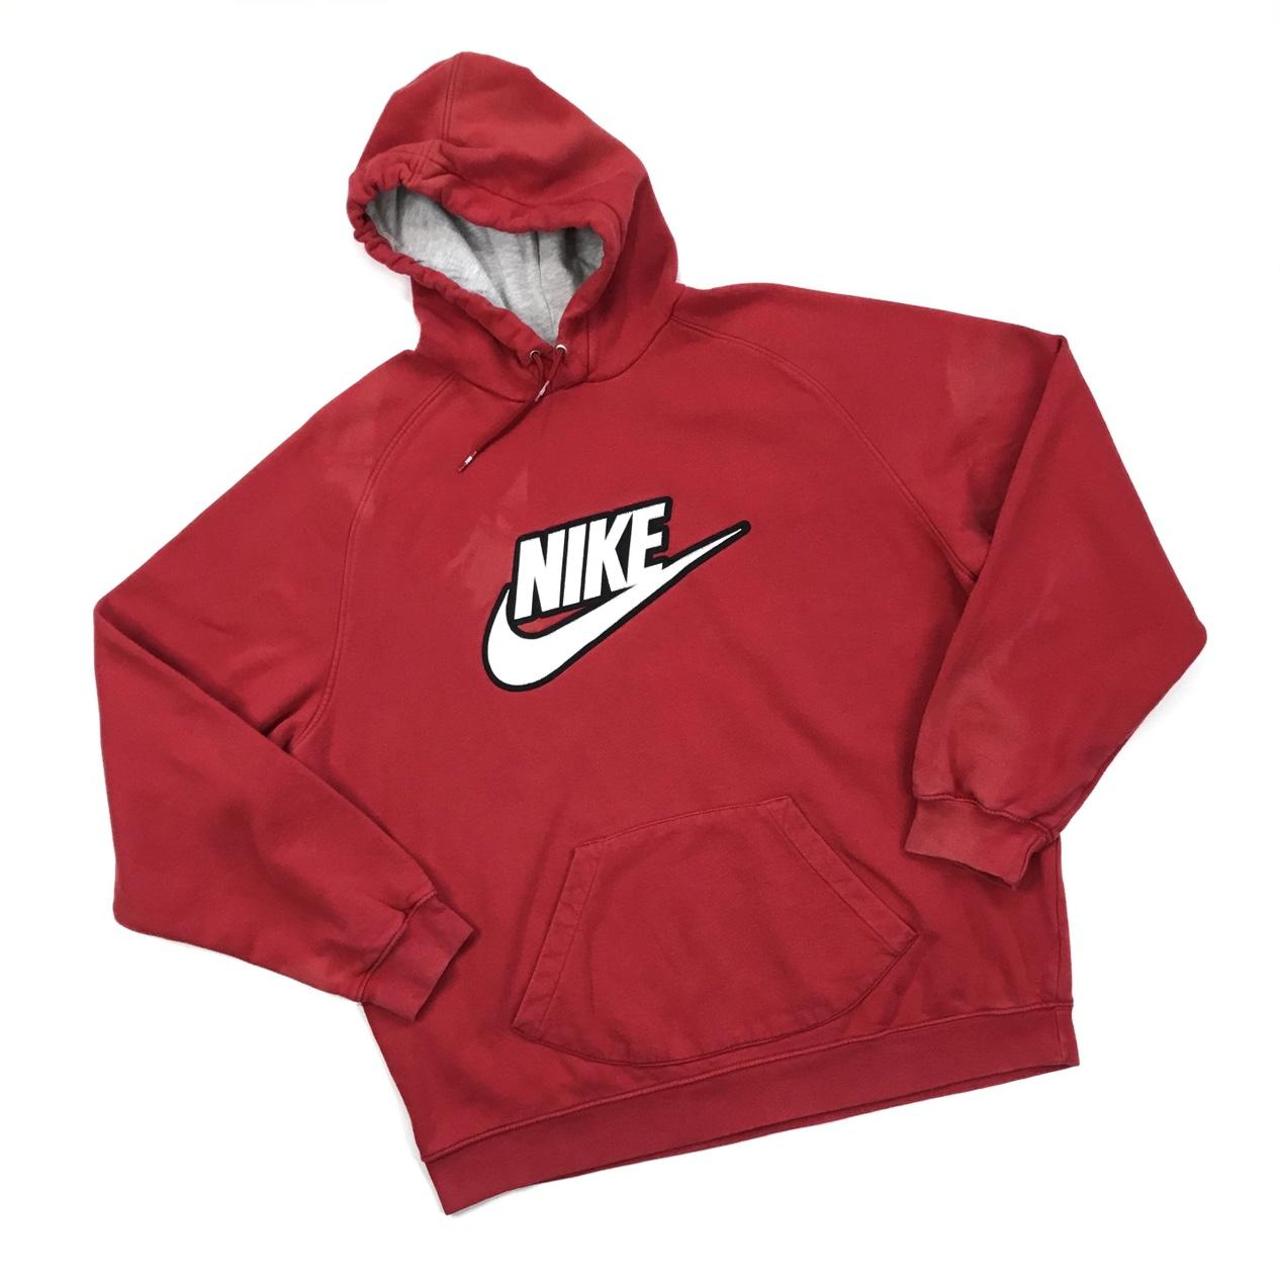 Nike Men's White and Red Hoodie